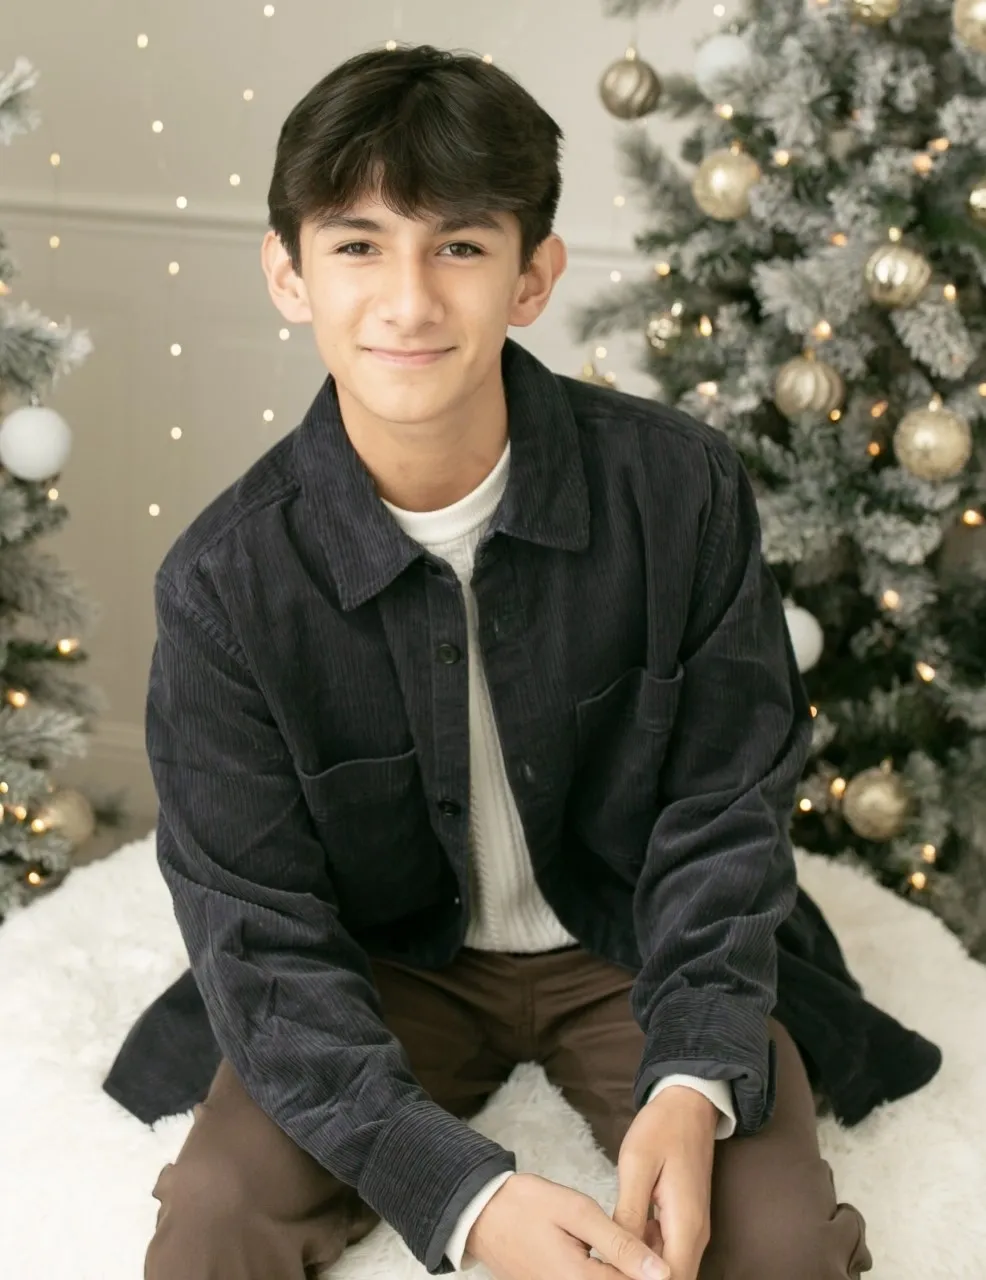 A young man sitting in front of christmas trees.